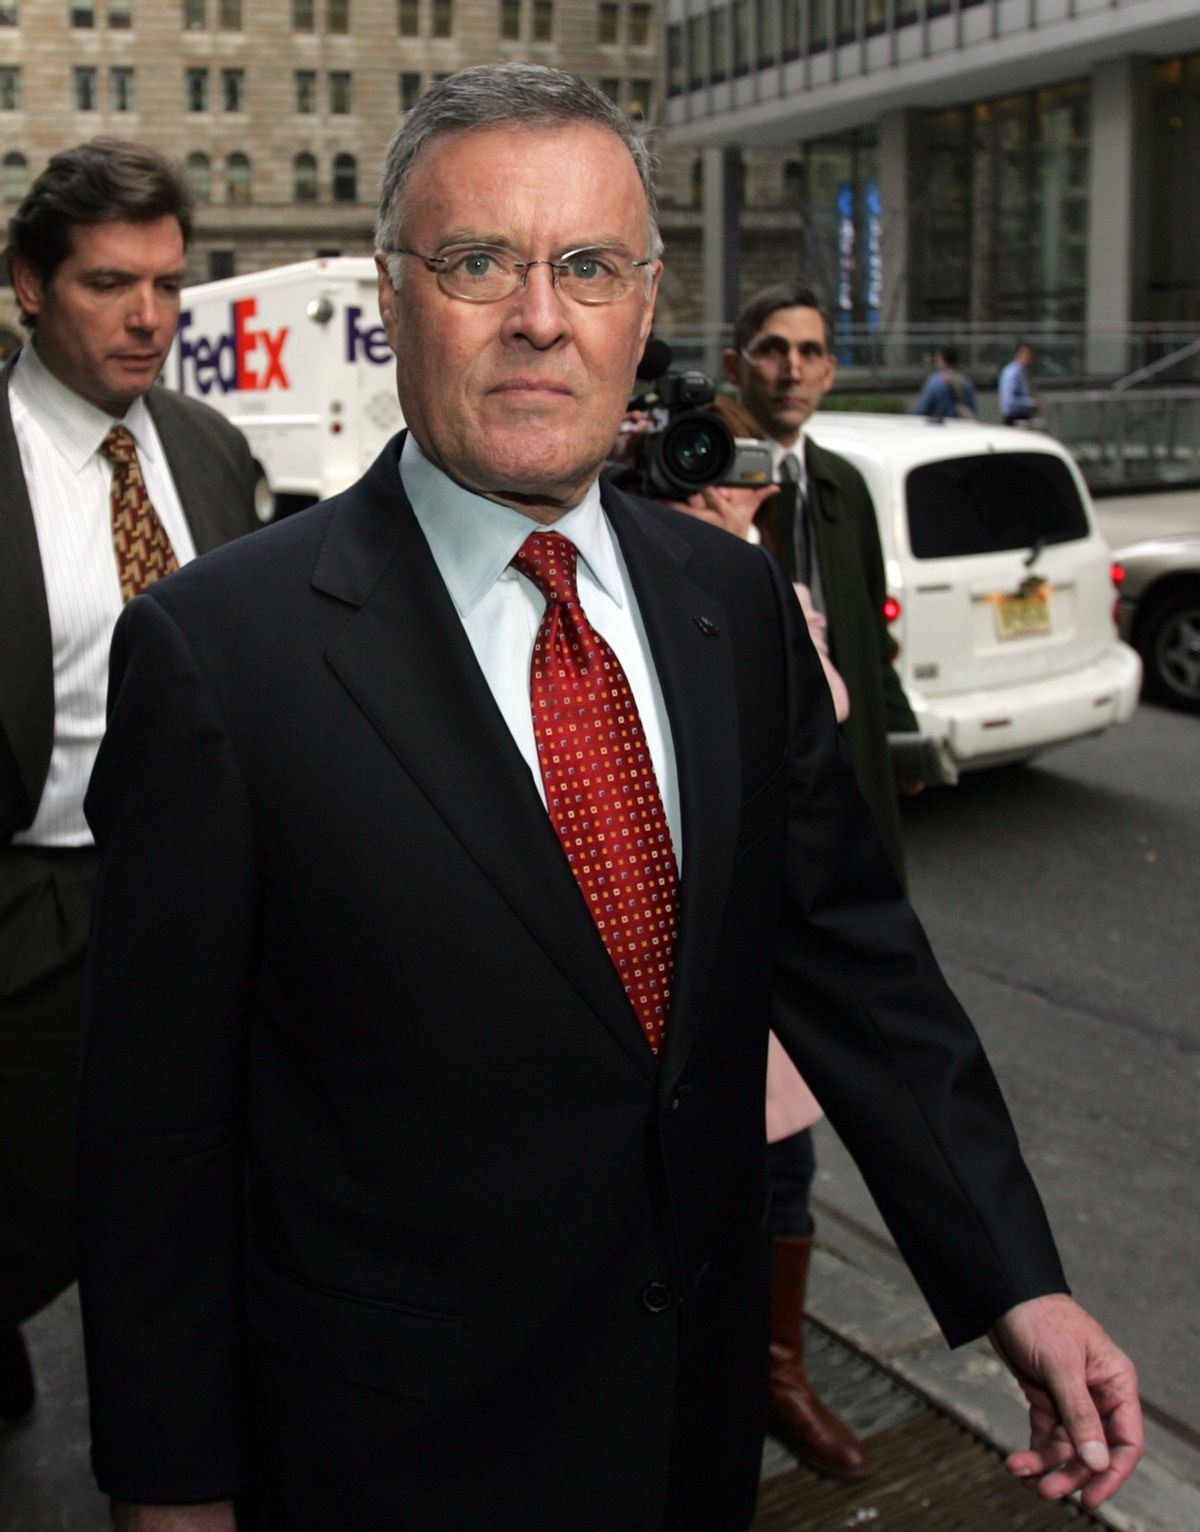 Bank of America Corp.'s CEO Ken Lewis arrives at the building that houses the New York Attorney General Andrew Cuomo's office, Thursday, Feb. 26, 2009 in New York.  (AP Photo/Mary Altaffer) (Mary Altaffer)